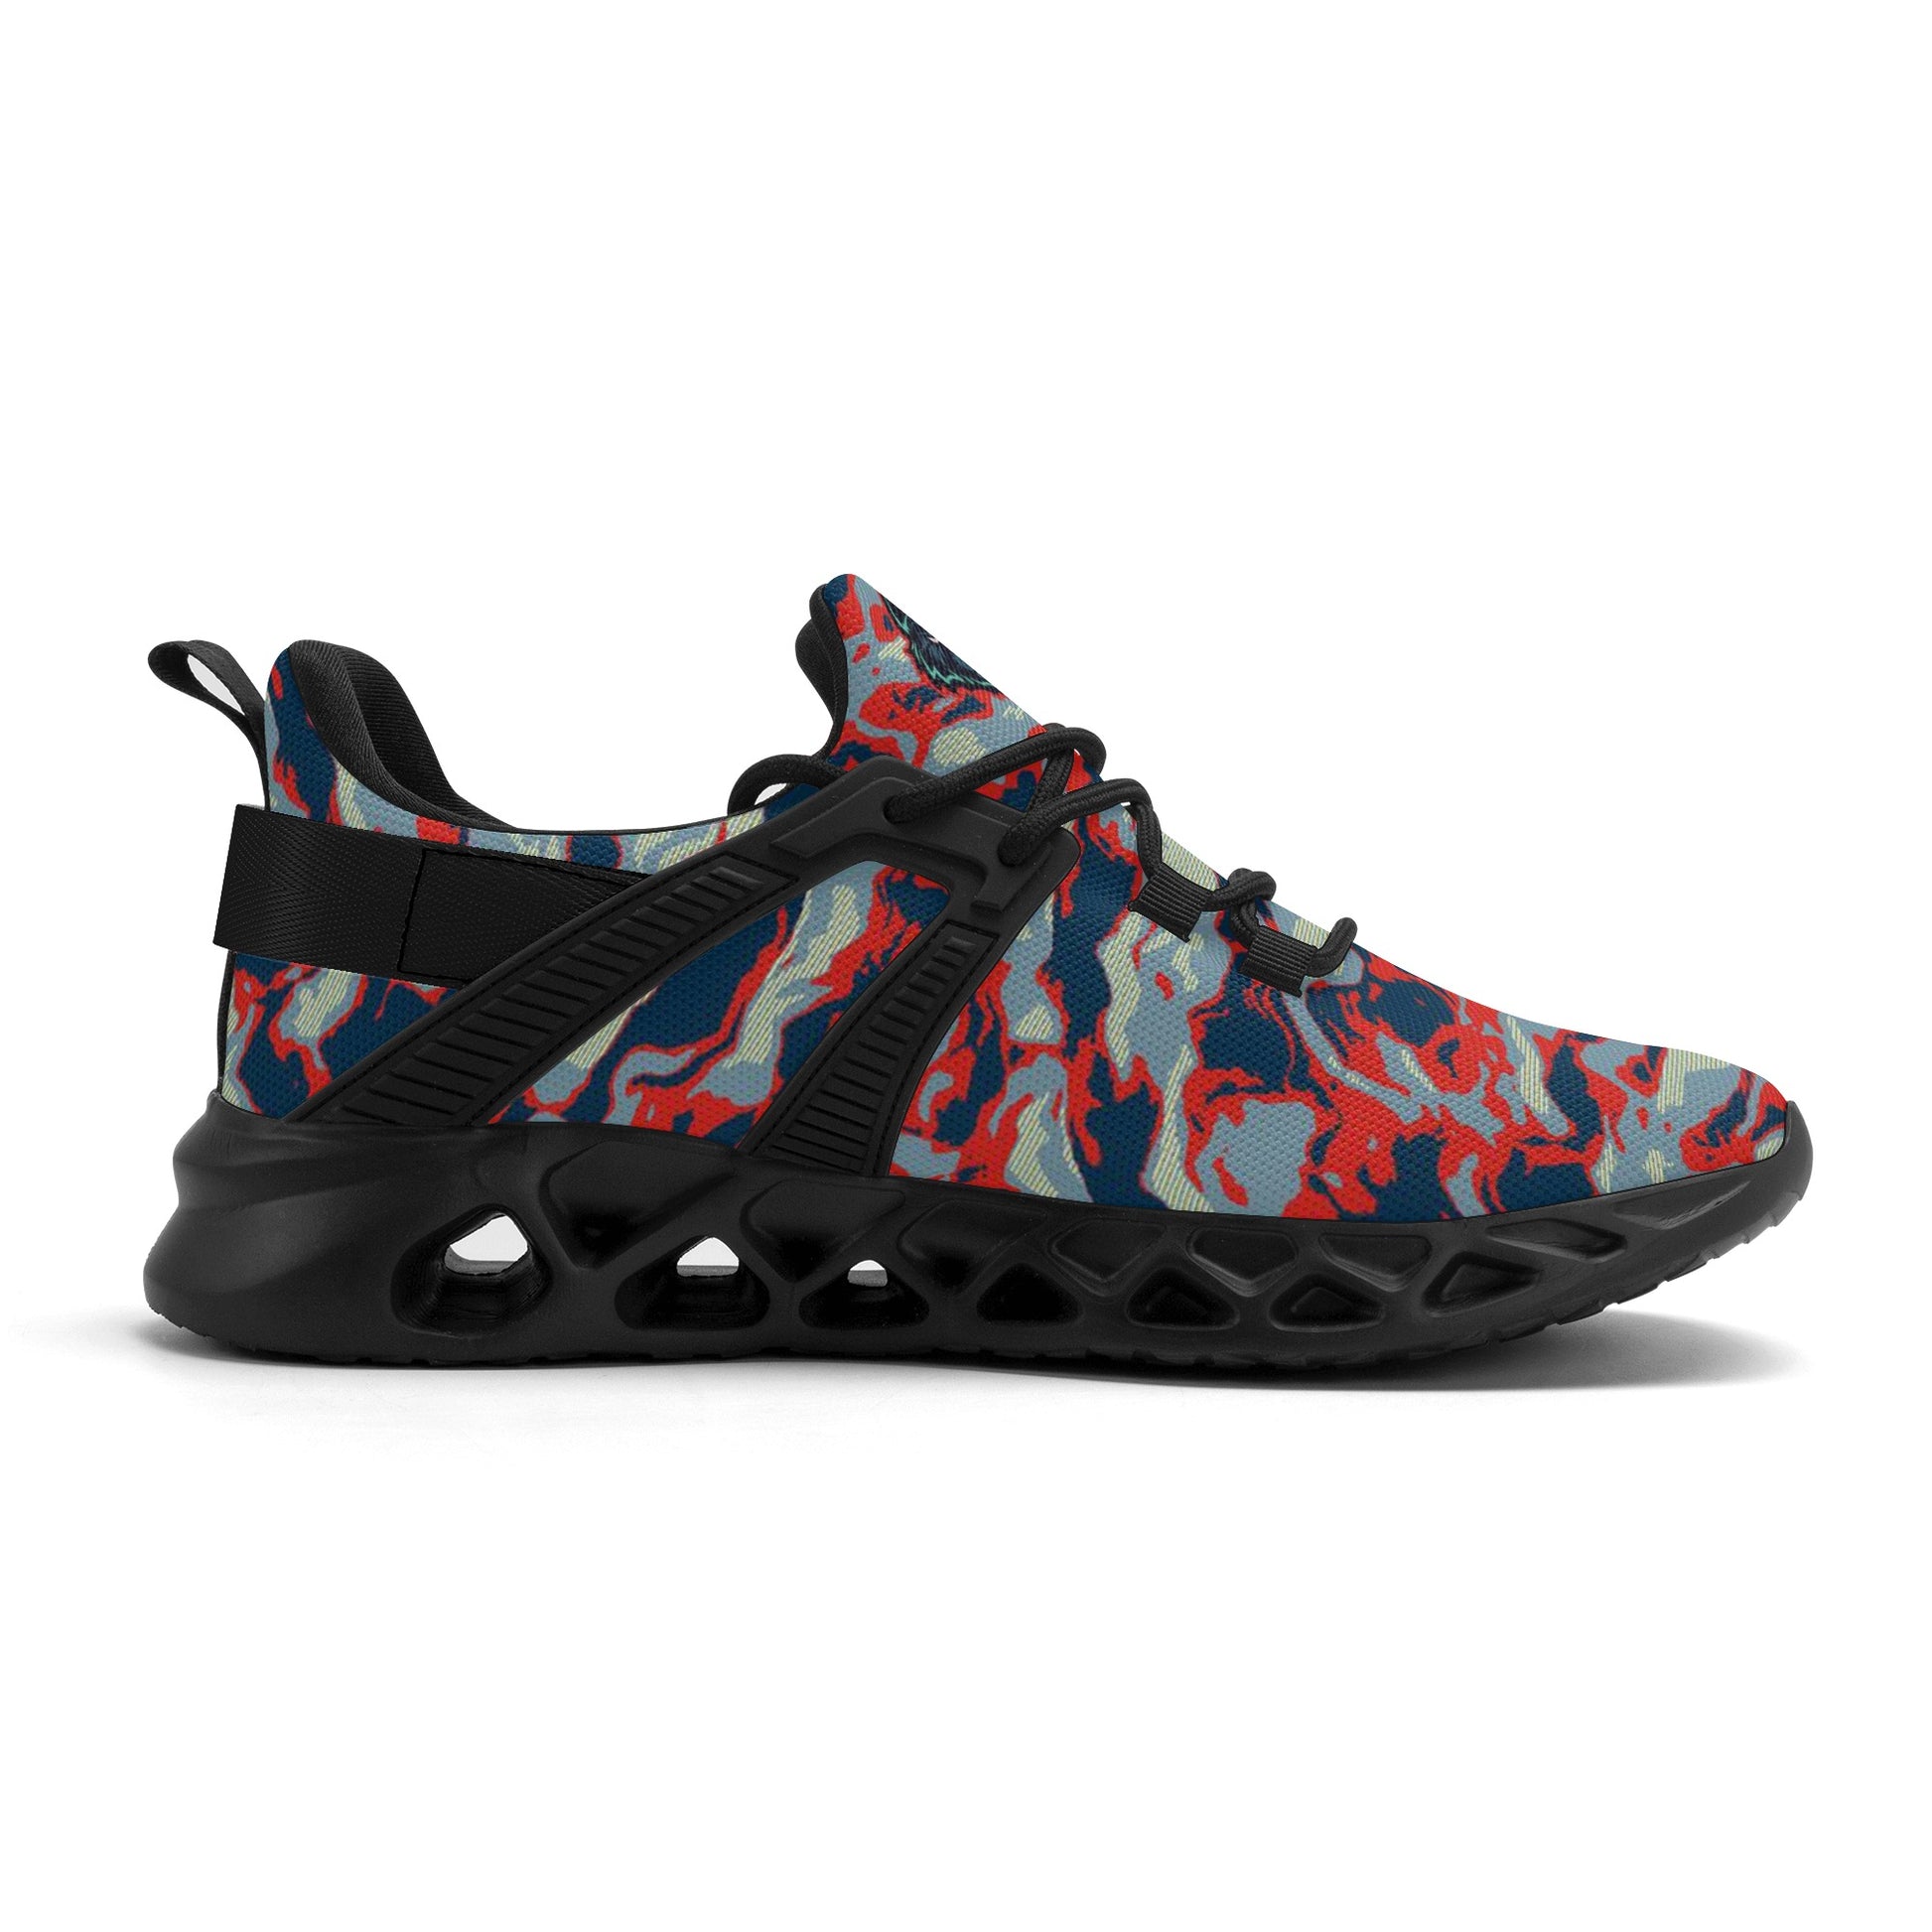 Camo Wolf | Men's New Elastic Sport Sneakers - Stylish and Comfortable - AGTC